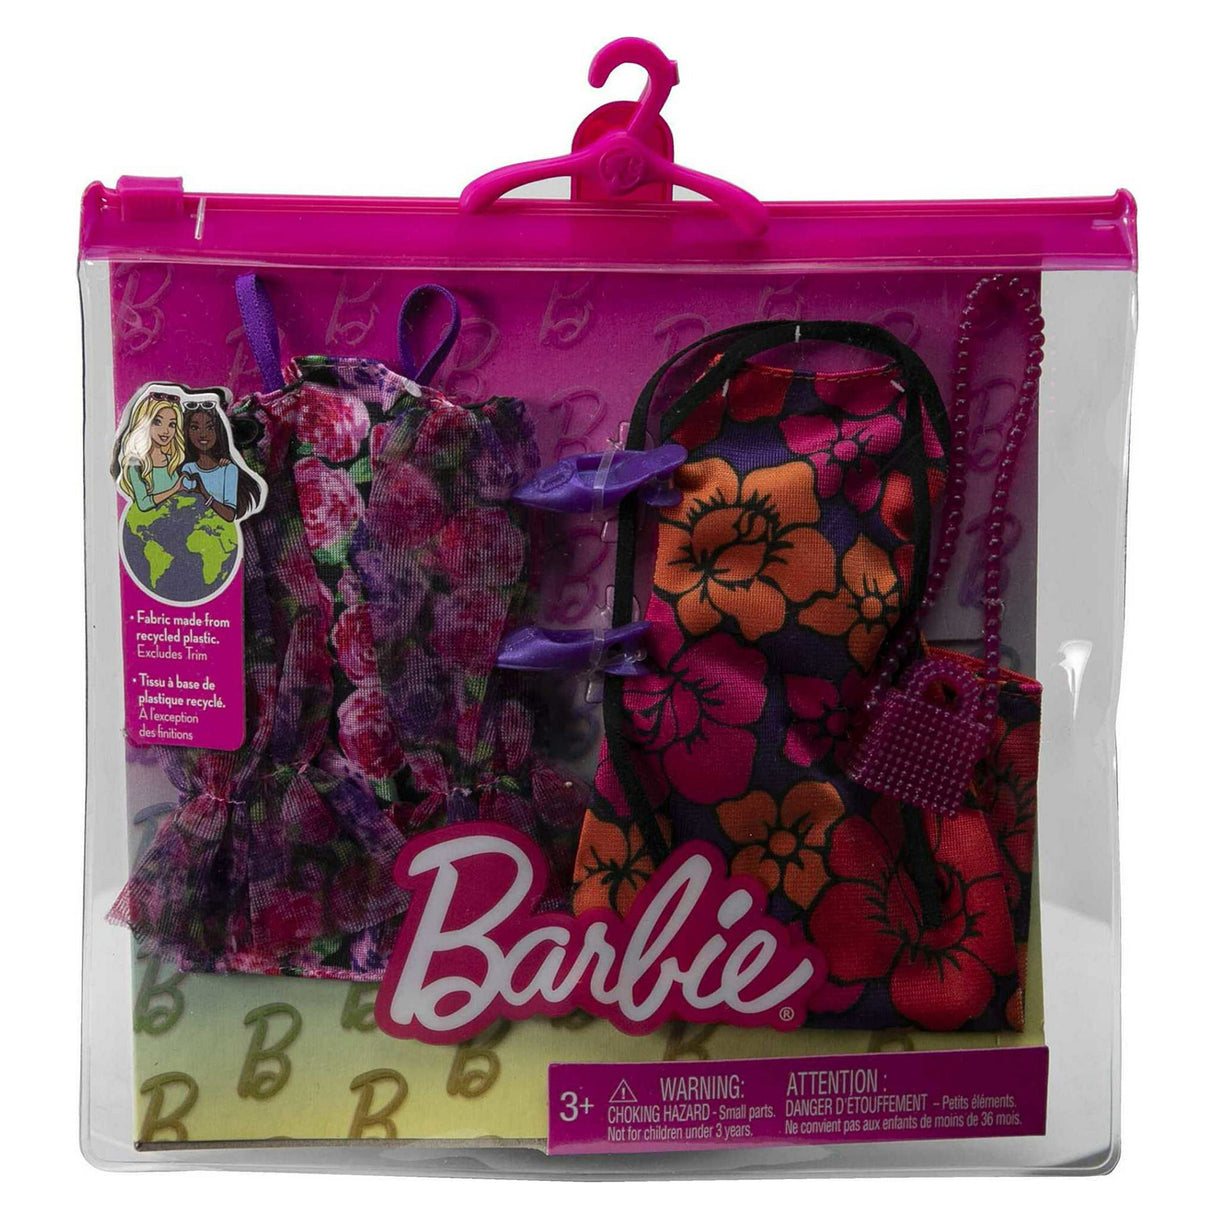 Barbie Clothes Floral-Themed Fashion and Accessory for Barbie Dolls(Pack of 2)